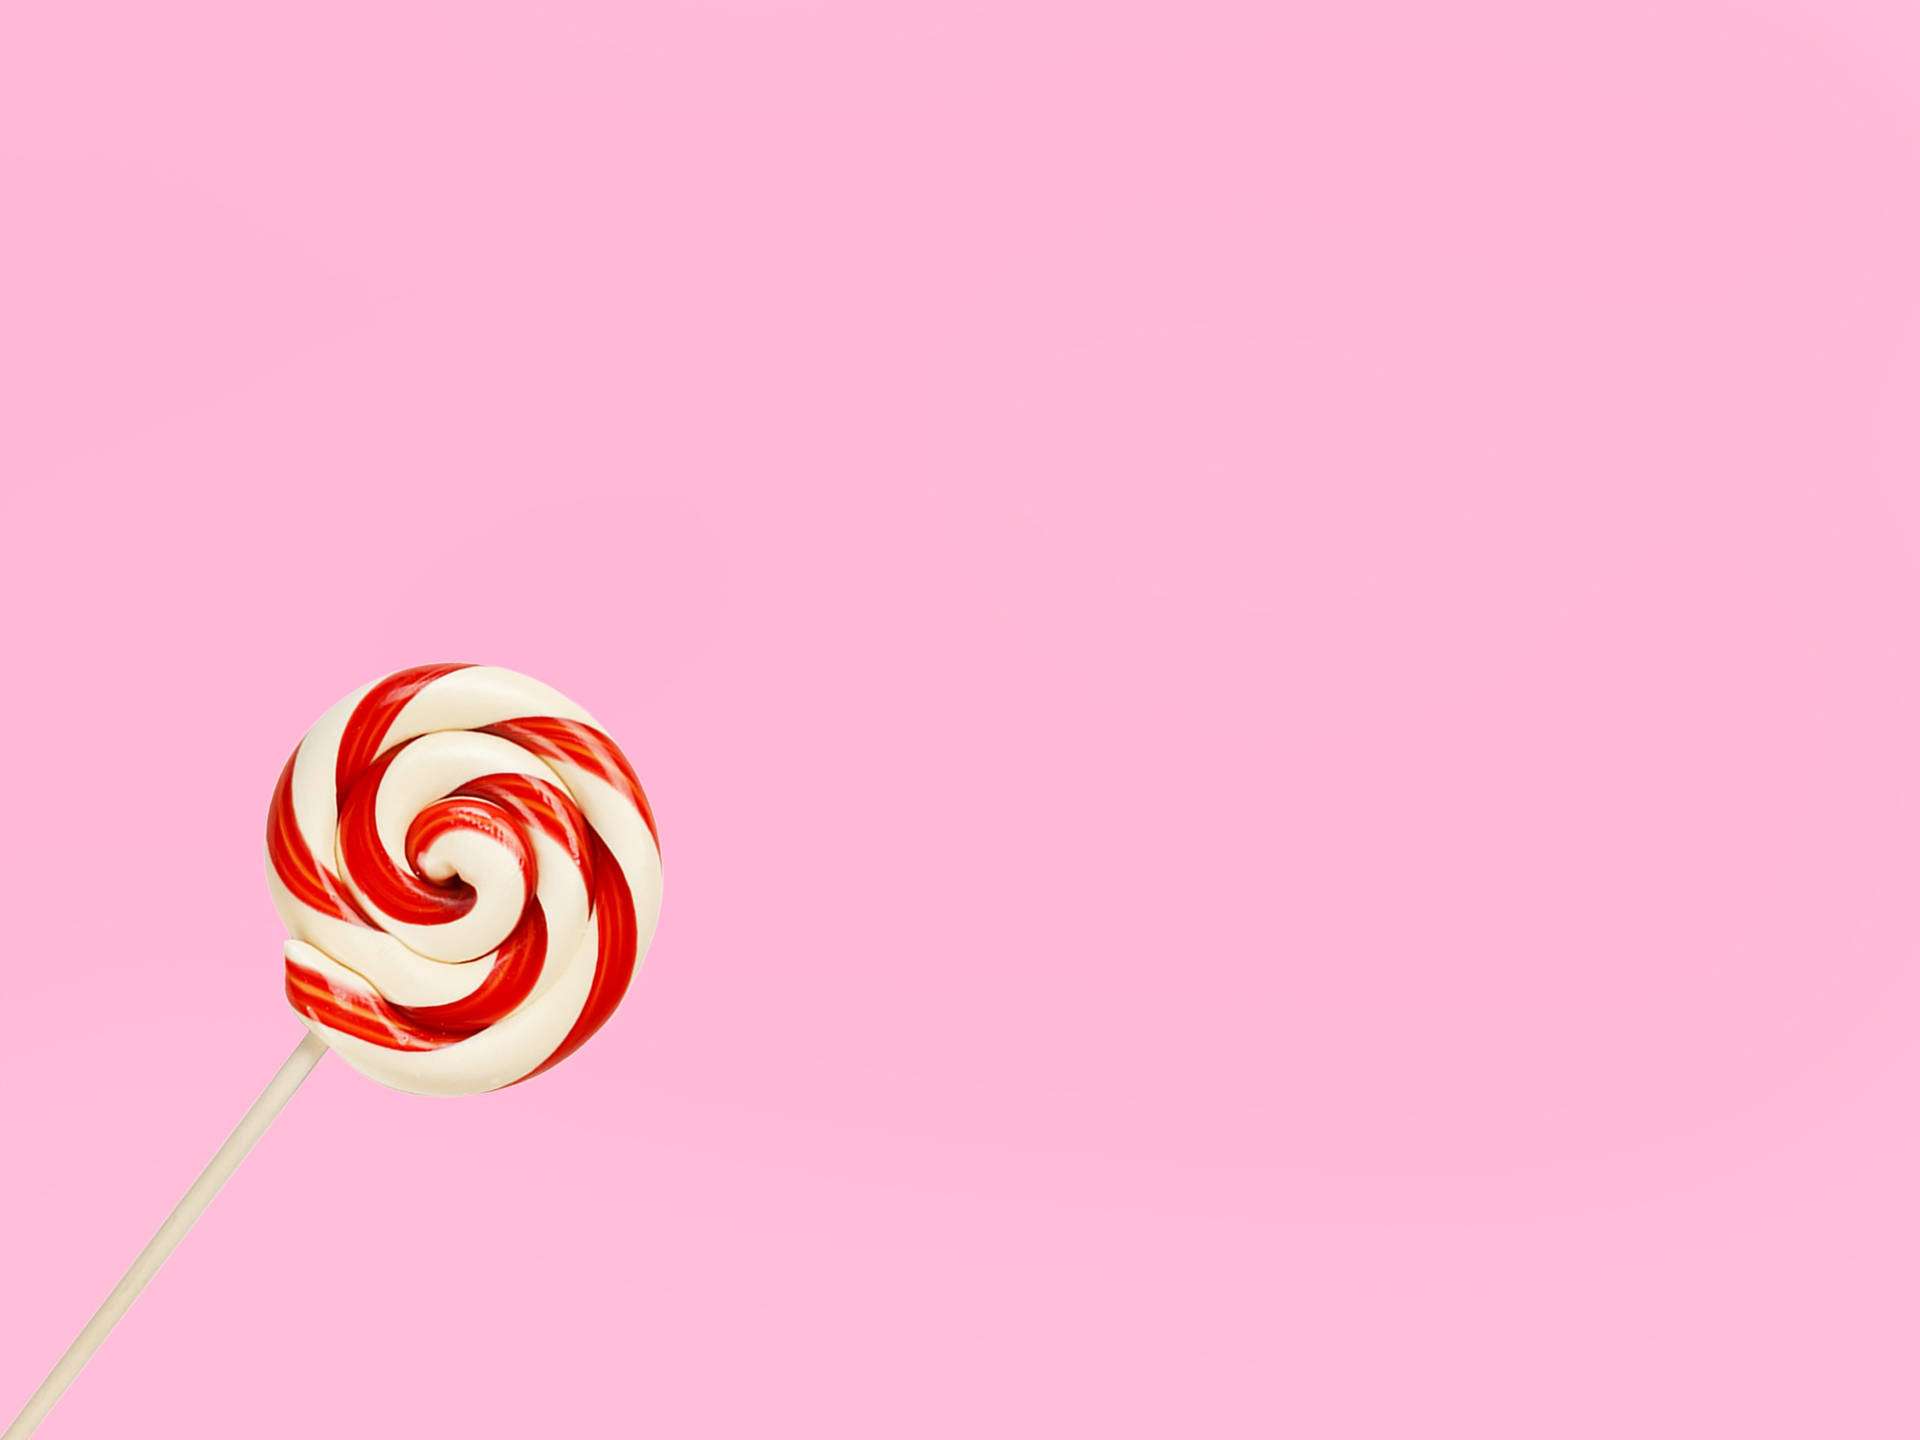 Red And White Lollipop On Pink Background